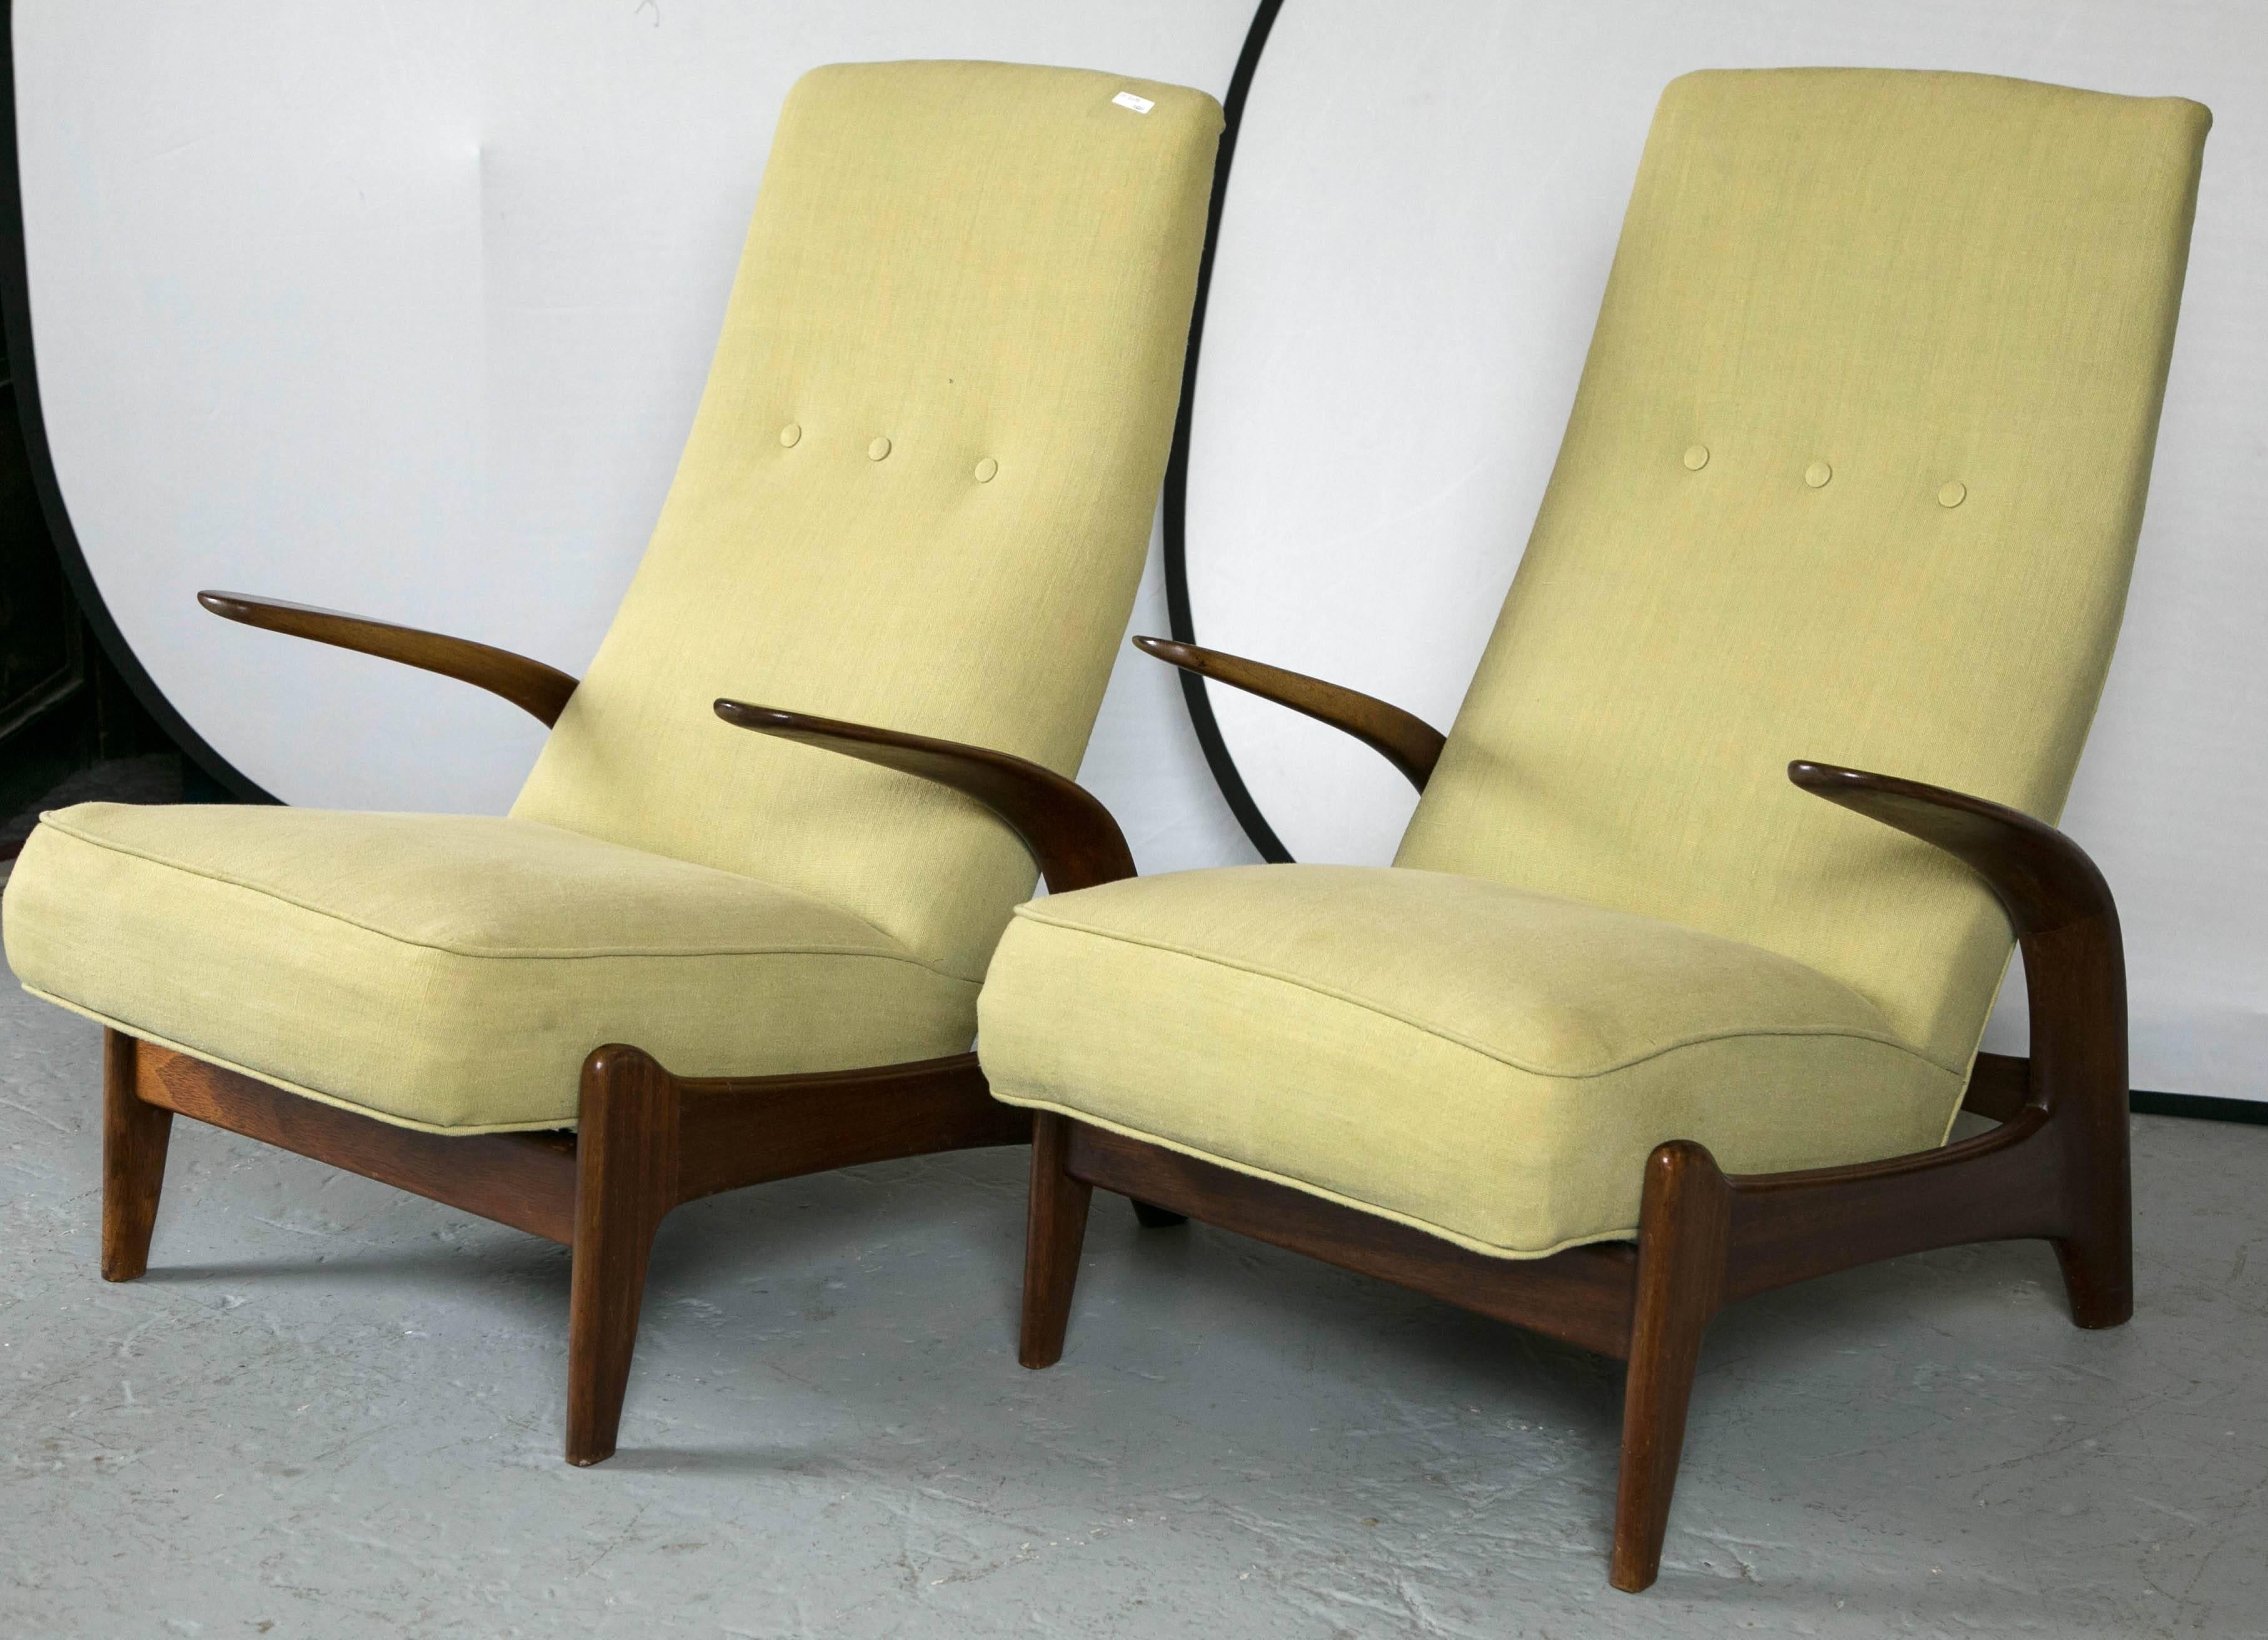 Pair of great Gimson & Slater “Rock n Rest” chairs. Each in a brand new olive green tufted back. The sleek flowing arms and legs support this wonderful tilting mechanism. The rosewood frames polished to a nice sheen with a fine hand rubbed French